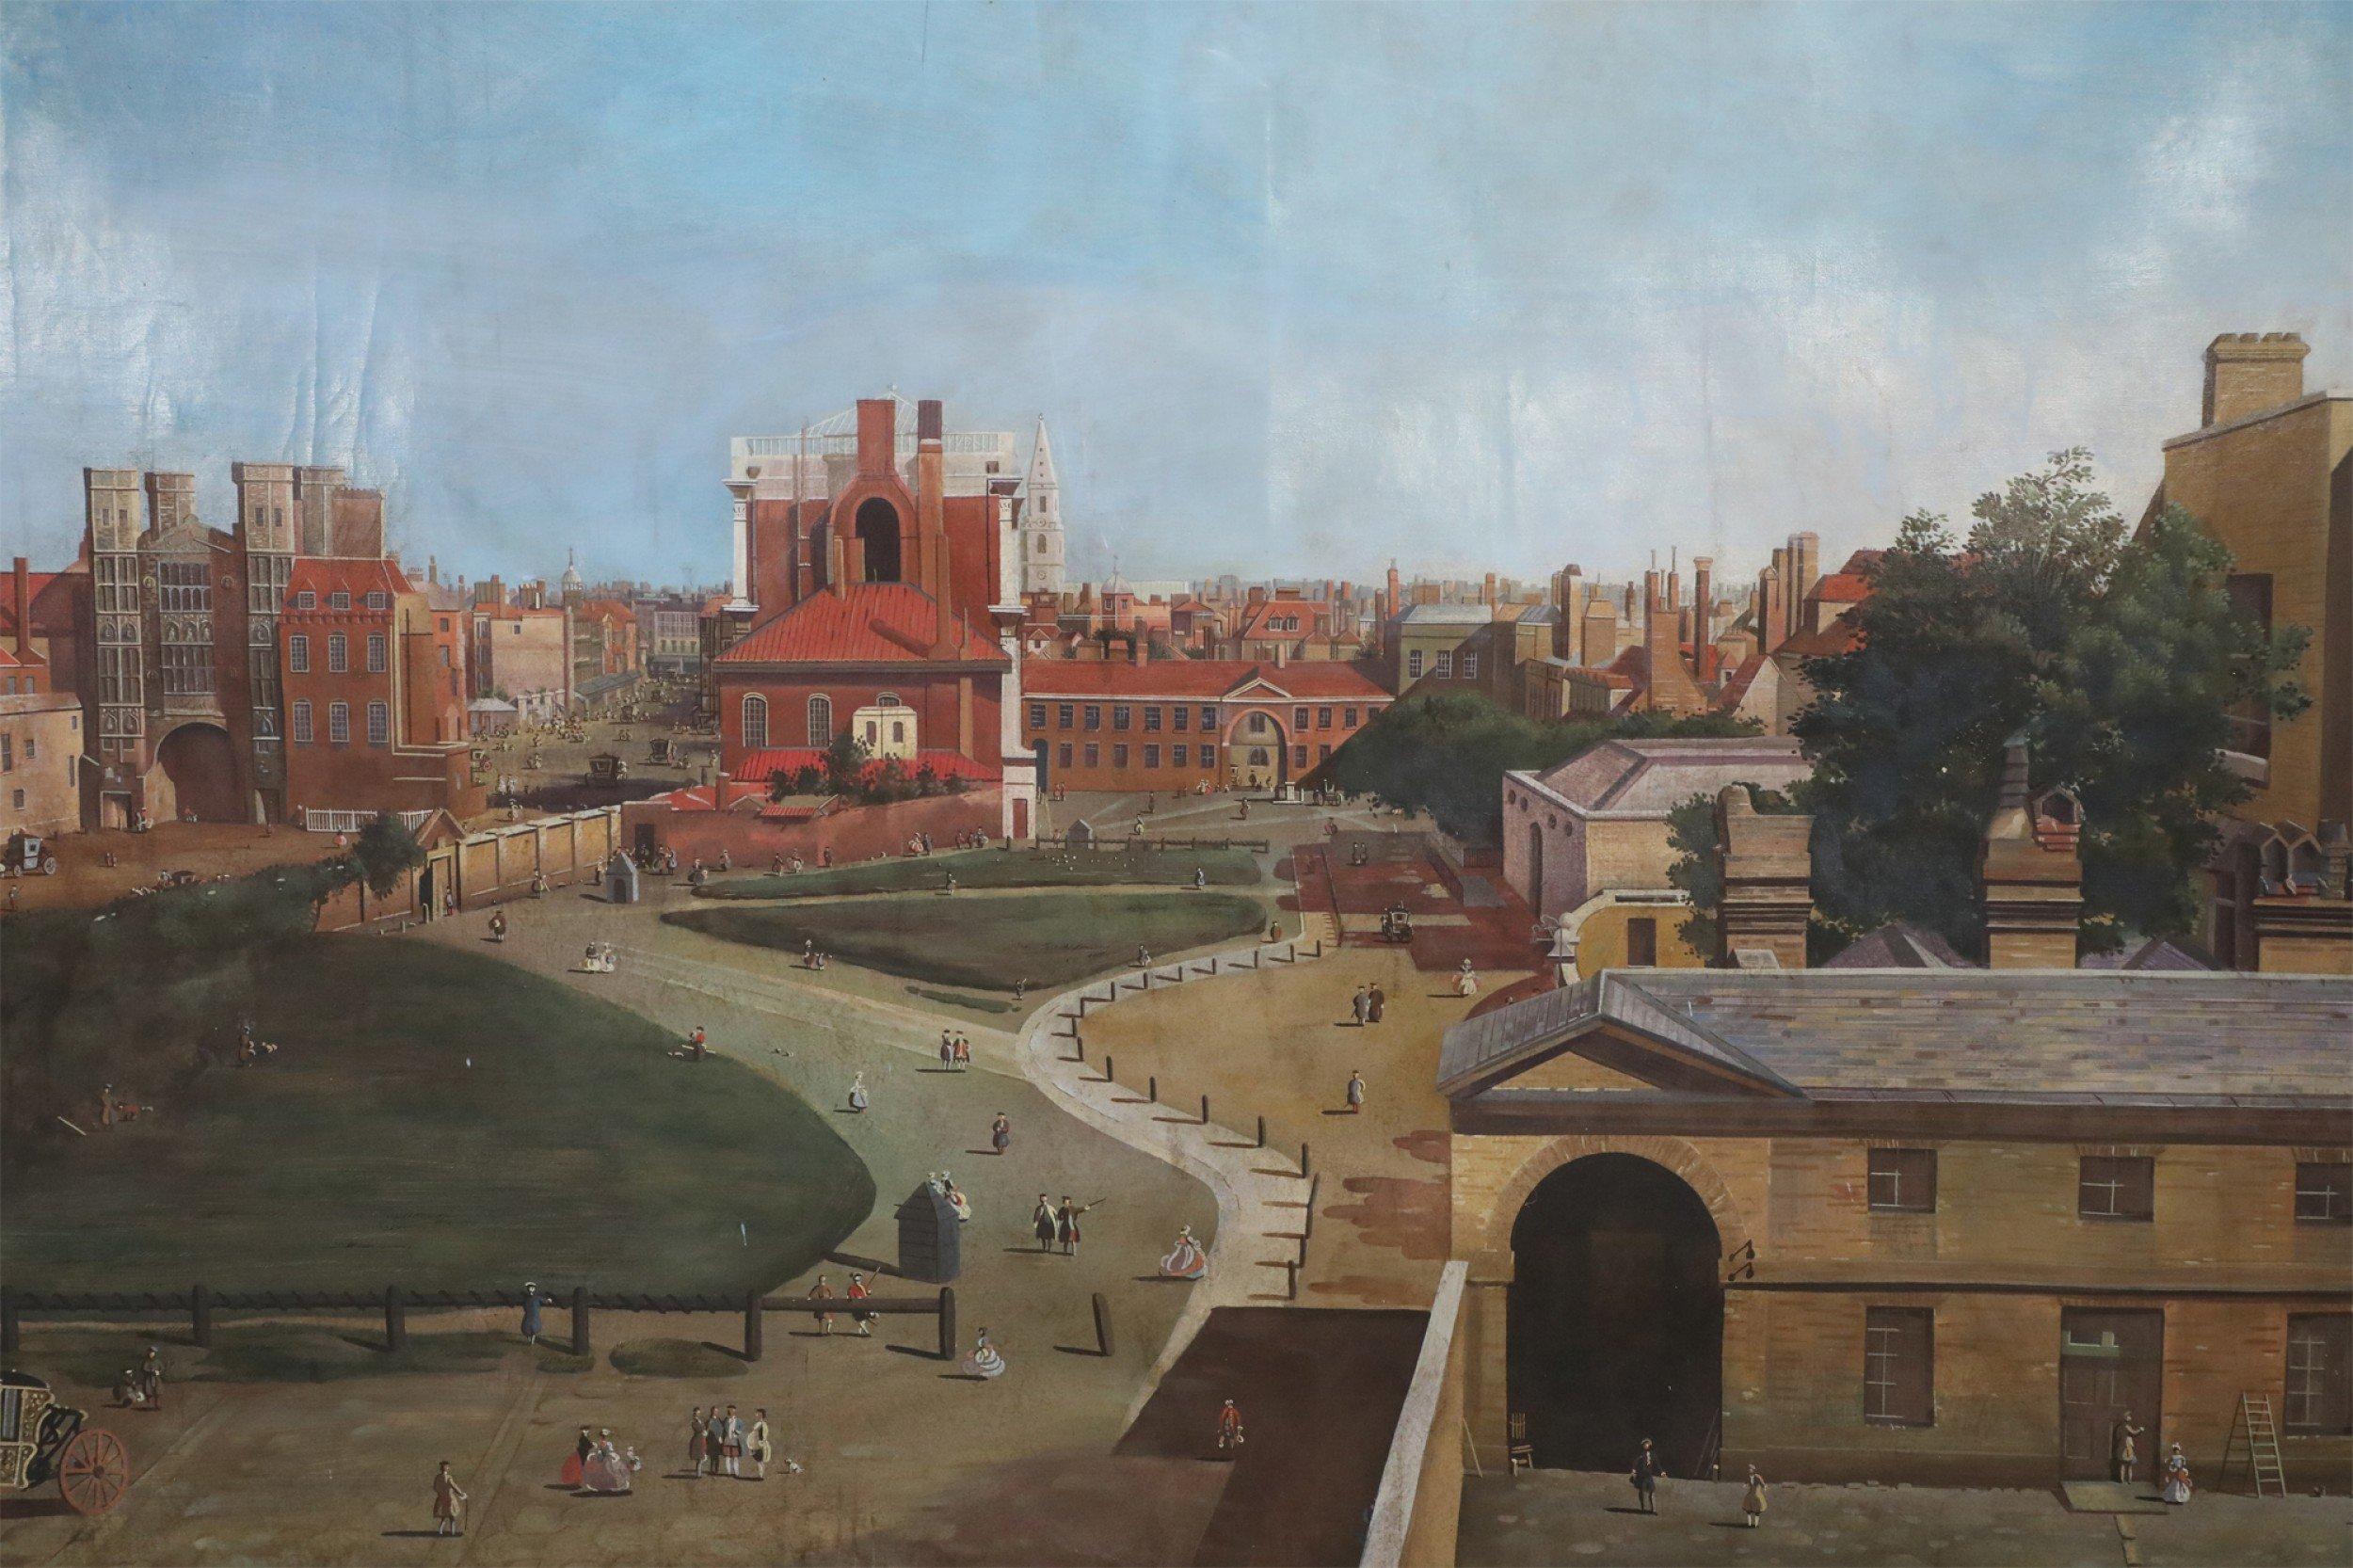 Vintage (20th century) painting of an 18th century town square captured from above, depicting figures moving throughout, greenery and lanes in the center, and buildings far into the distance, under a large light blue sky. Painted on unframed,